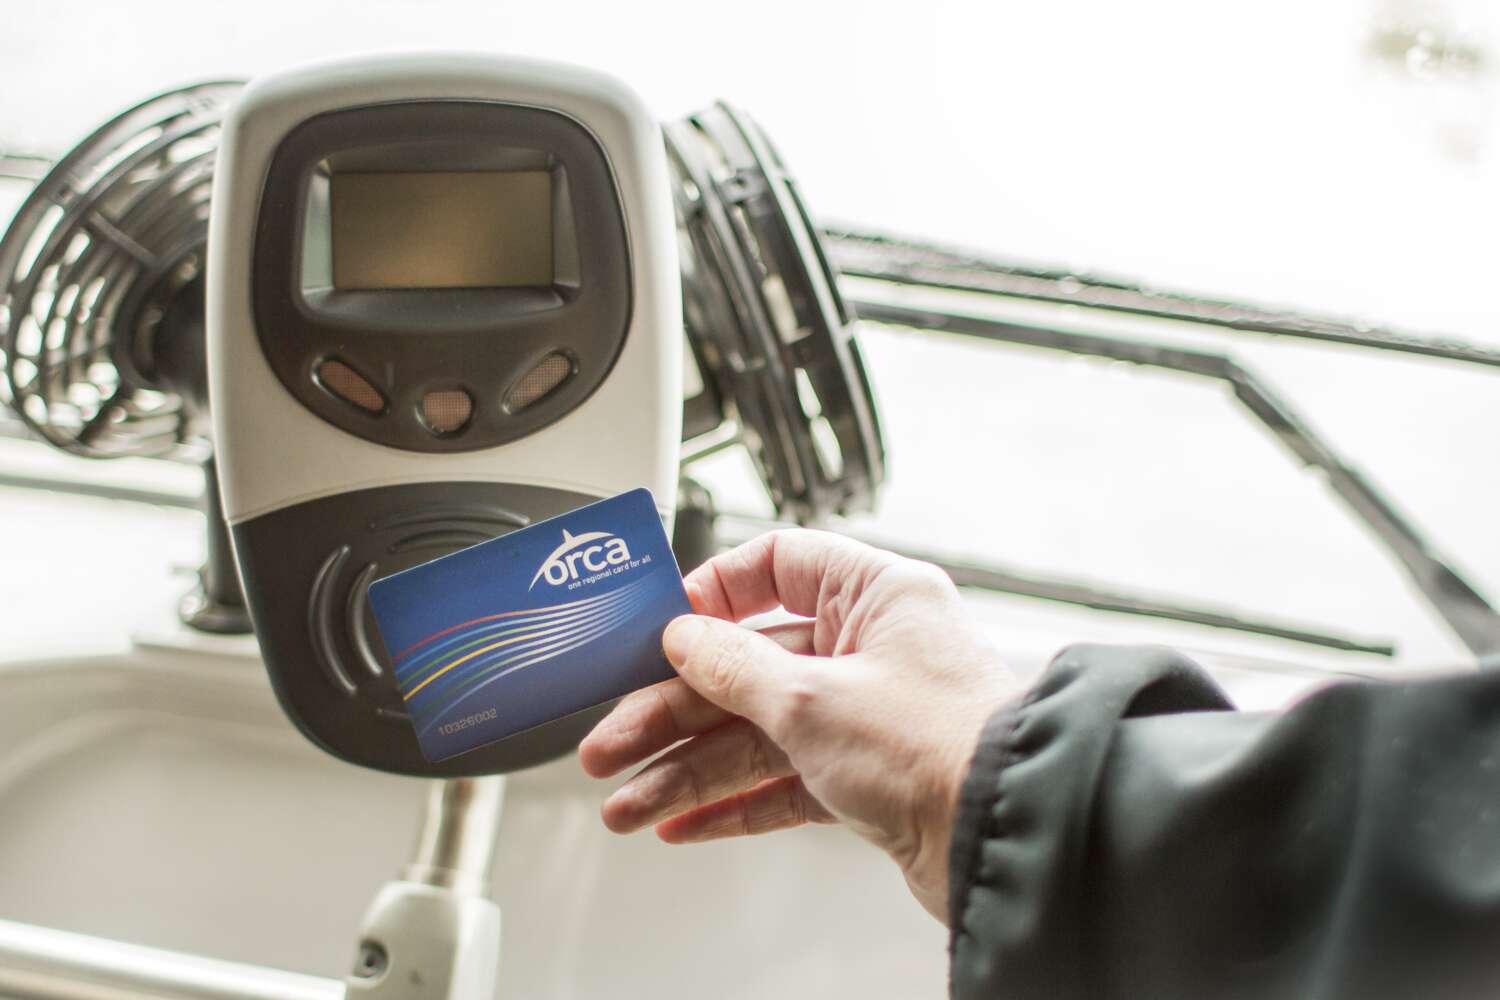 Rider uses ORCA card to boad a bus